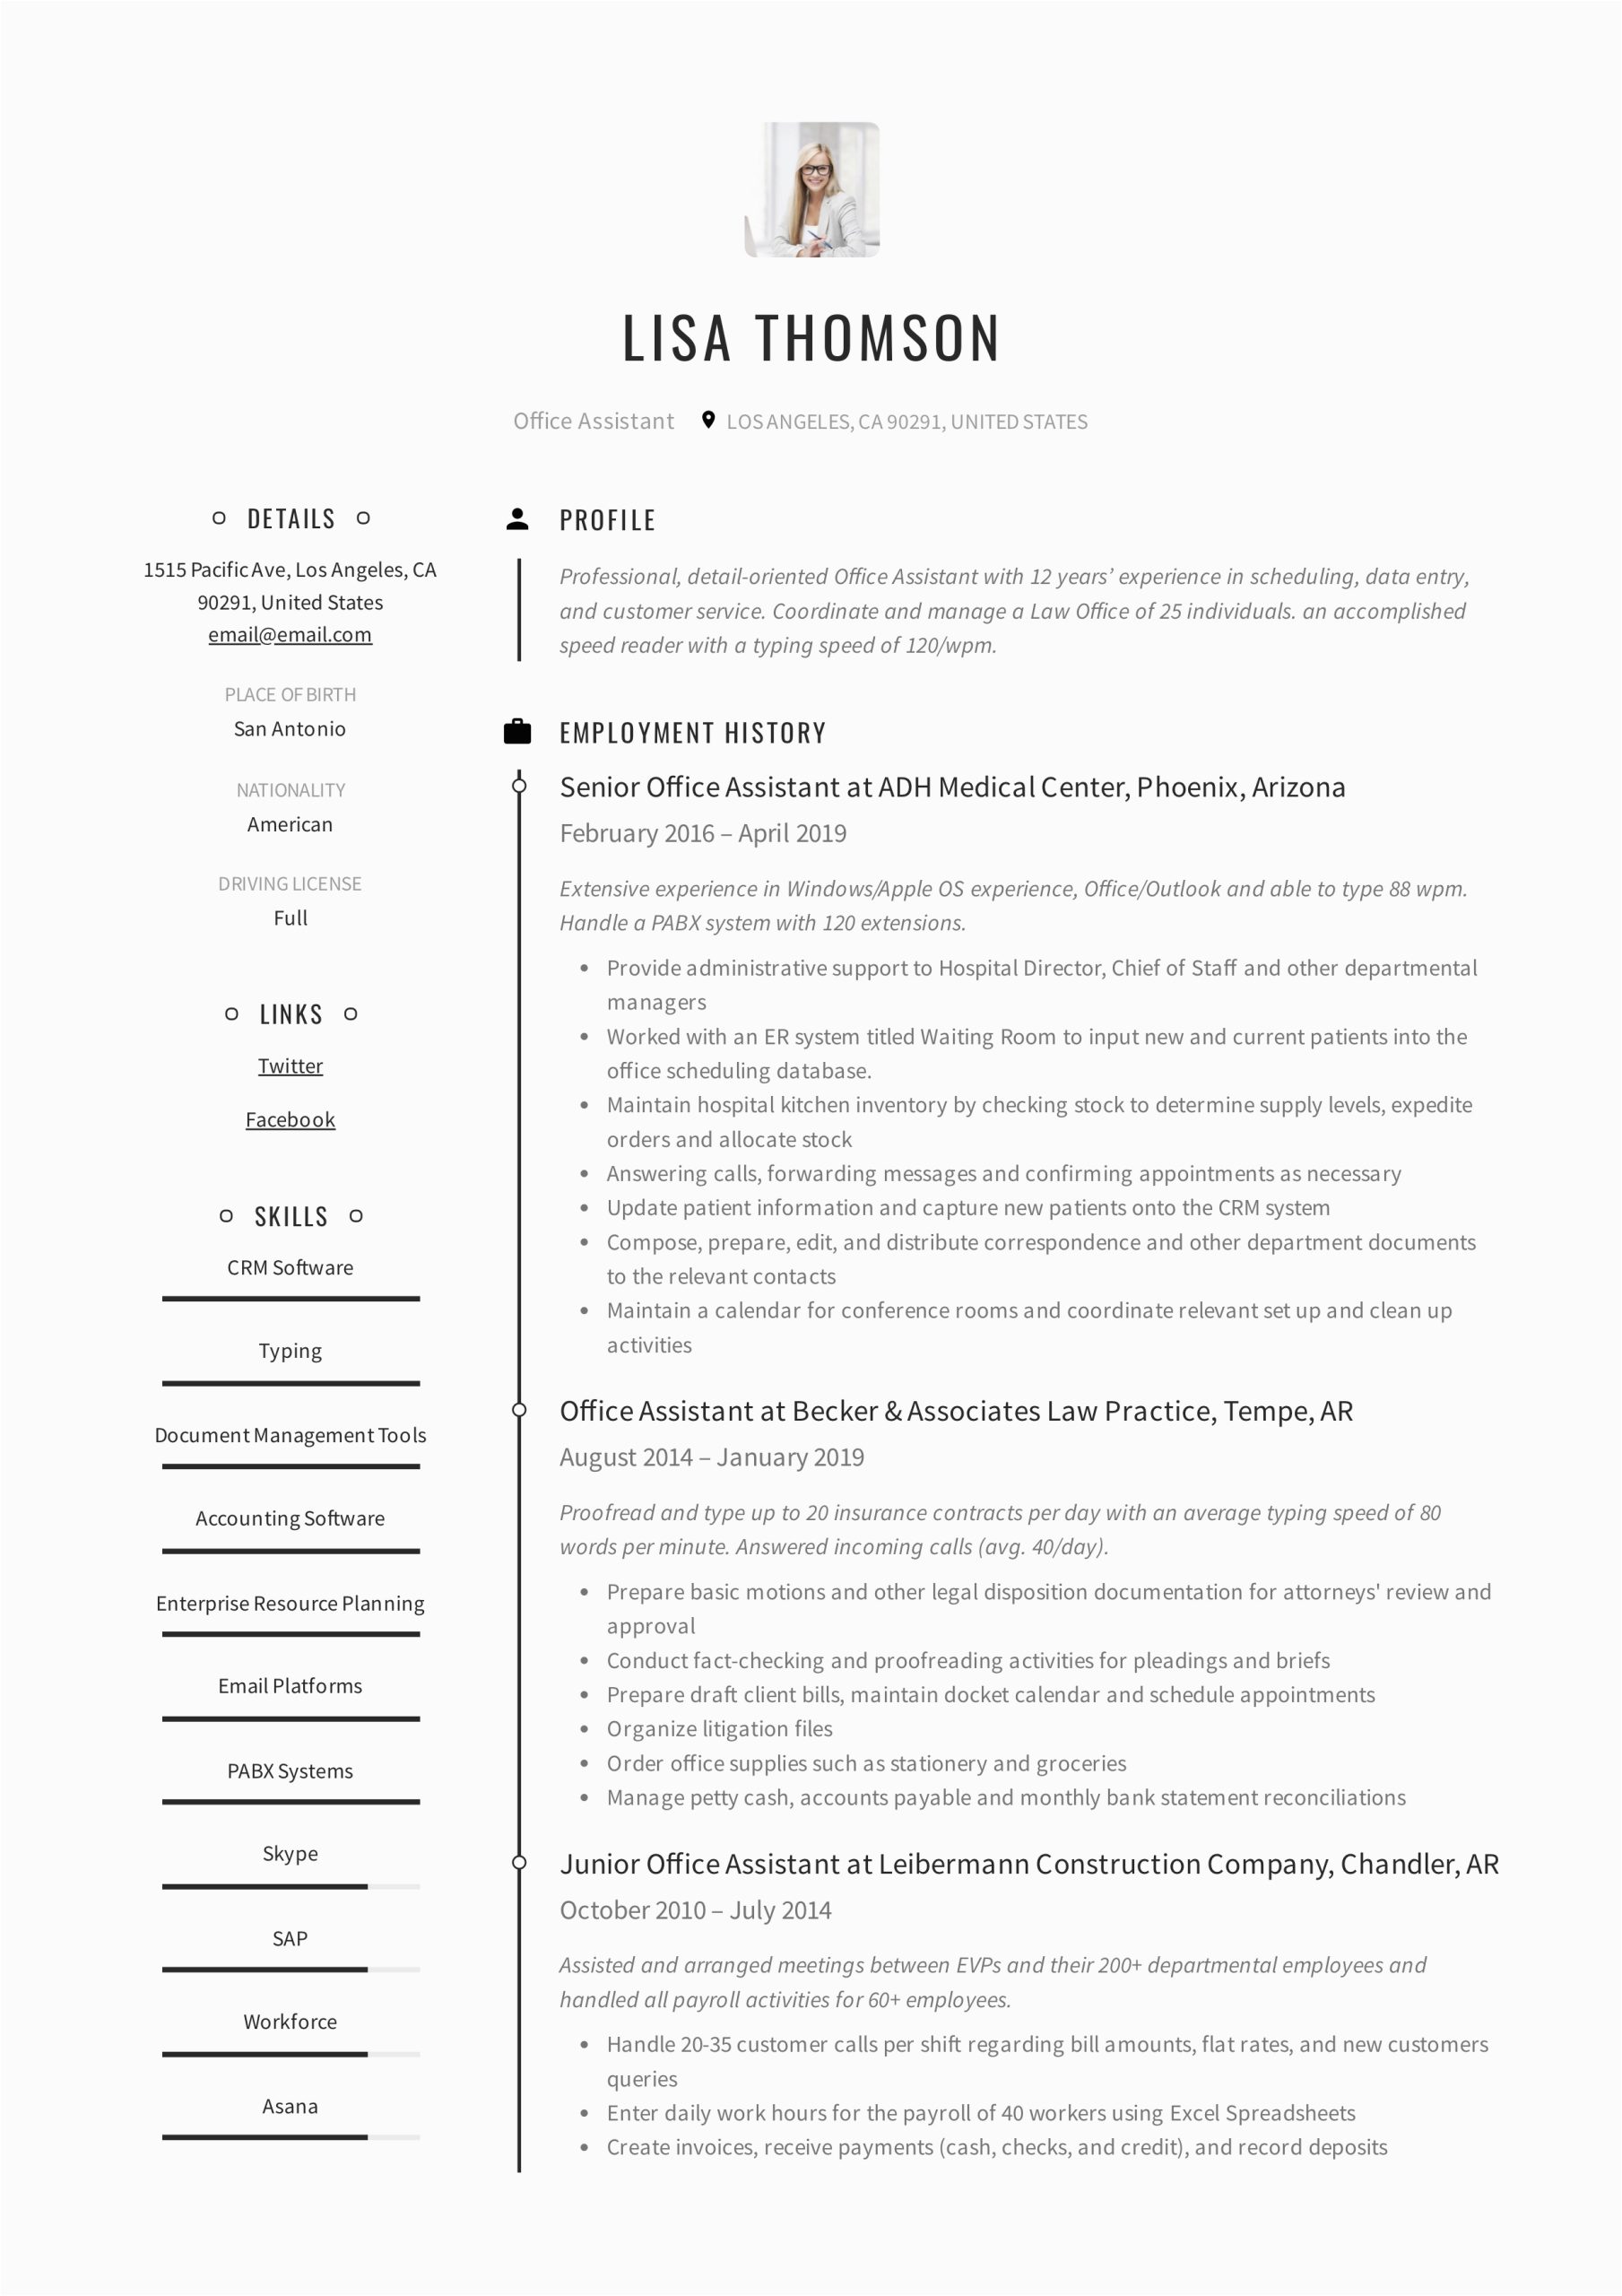 Resume Samples for Office assistant Job Fice assistant Resume Writing Guide 12 Resume Templates